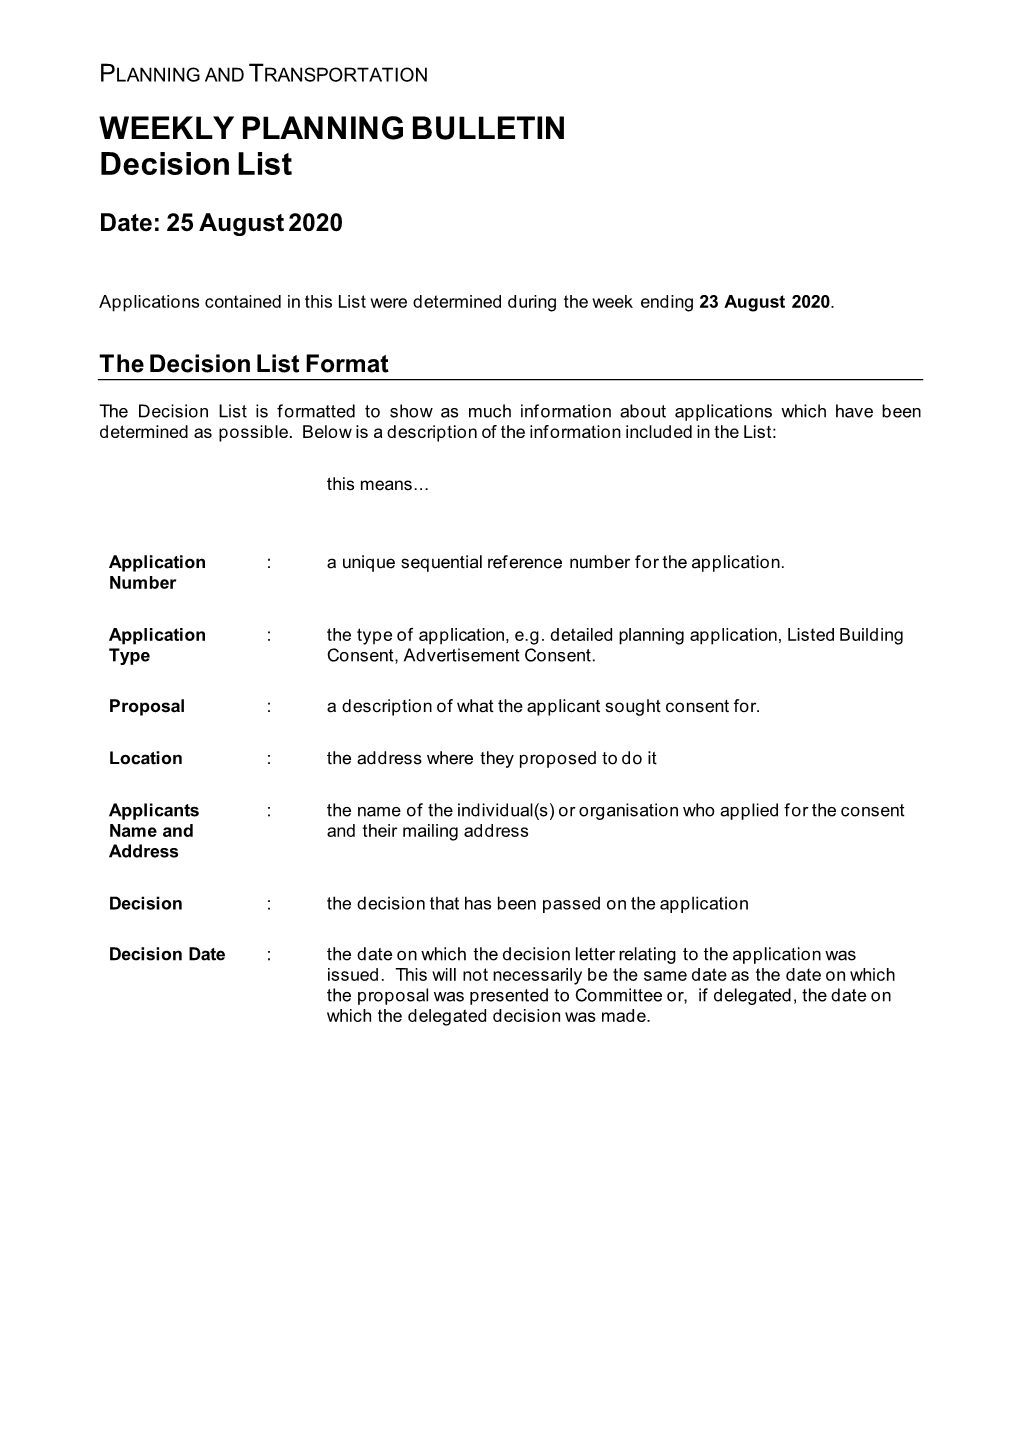 Planning Applications Determined 23 August 2020